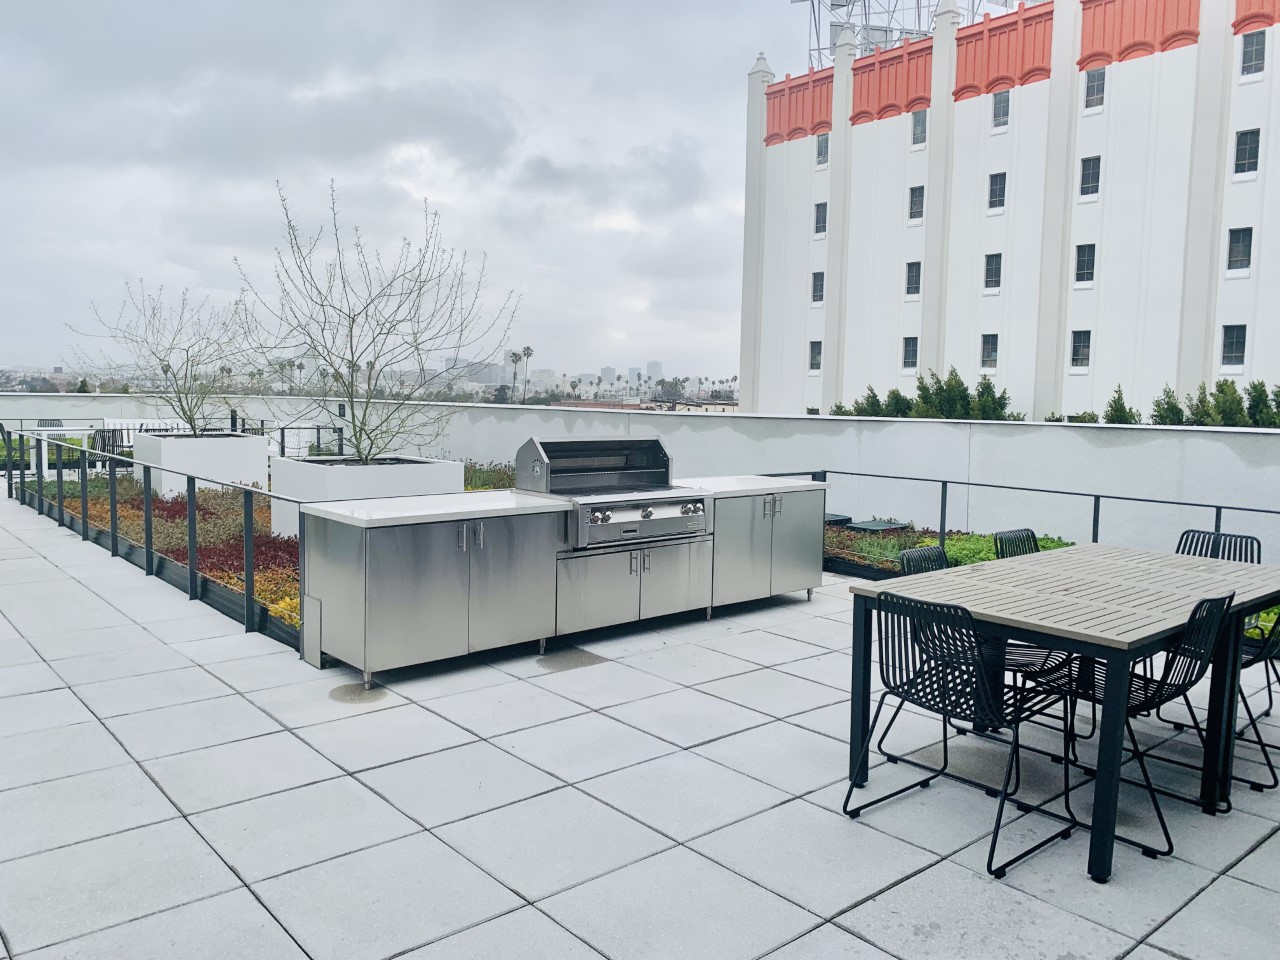 5th floor grill and designated smoking zone. Grill in front of a table with 6 chairs. Trees in planter with flowerbed.